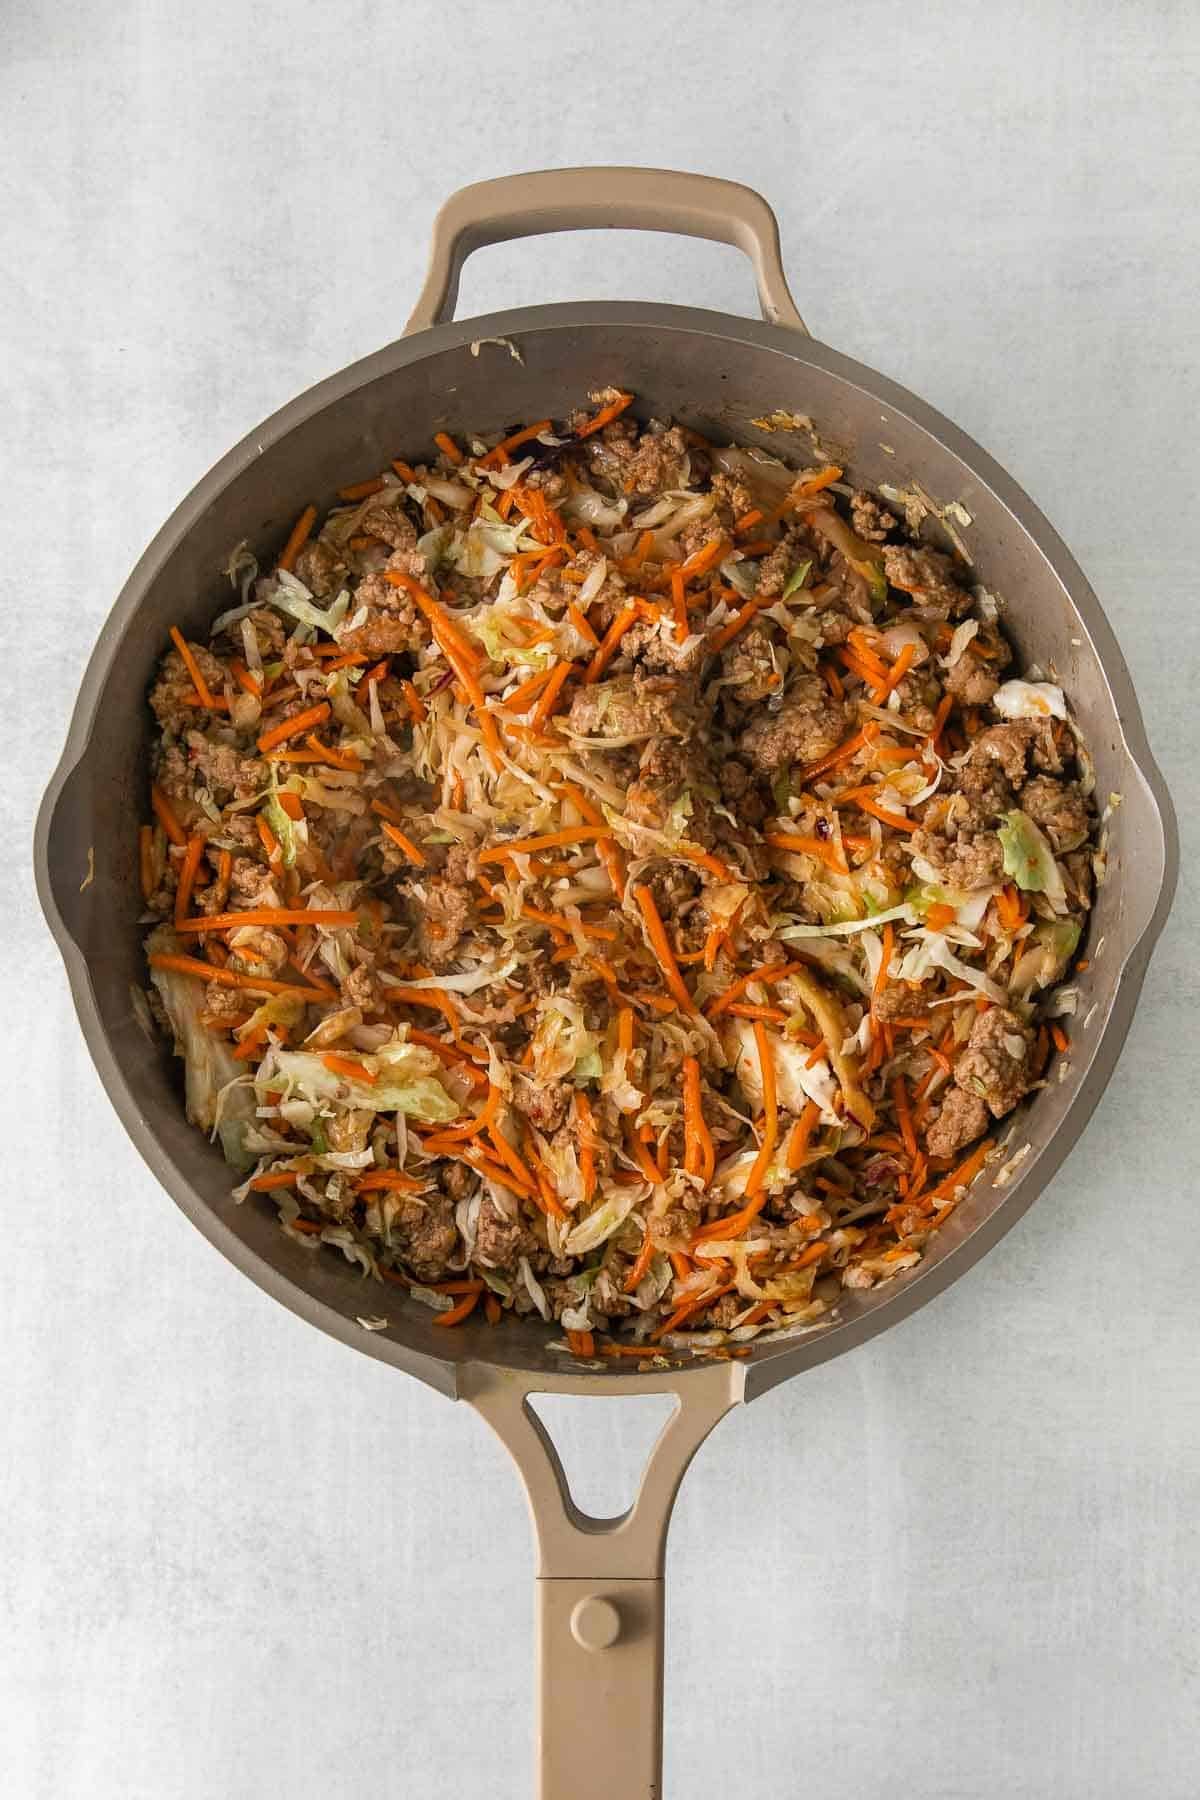 tan skillet with ground meat, shredded cabbage and carrots.